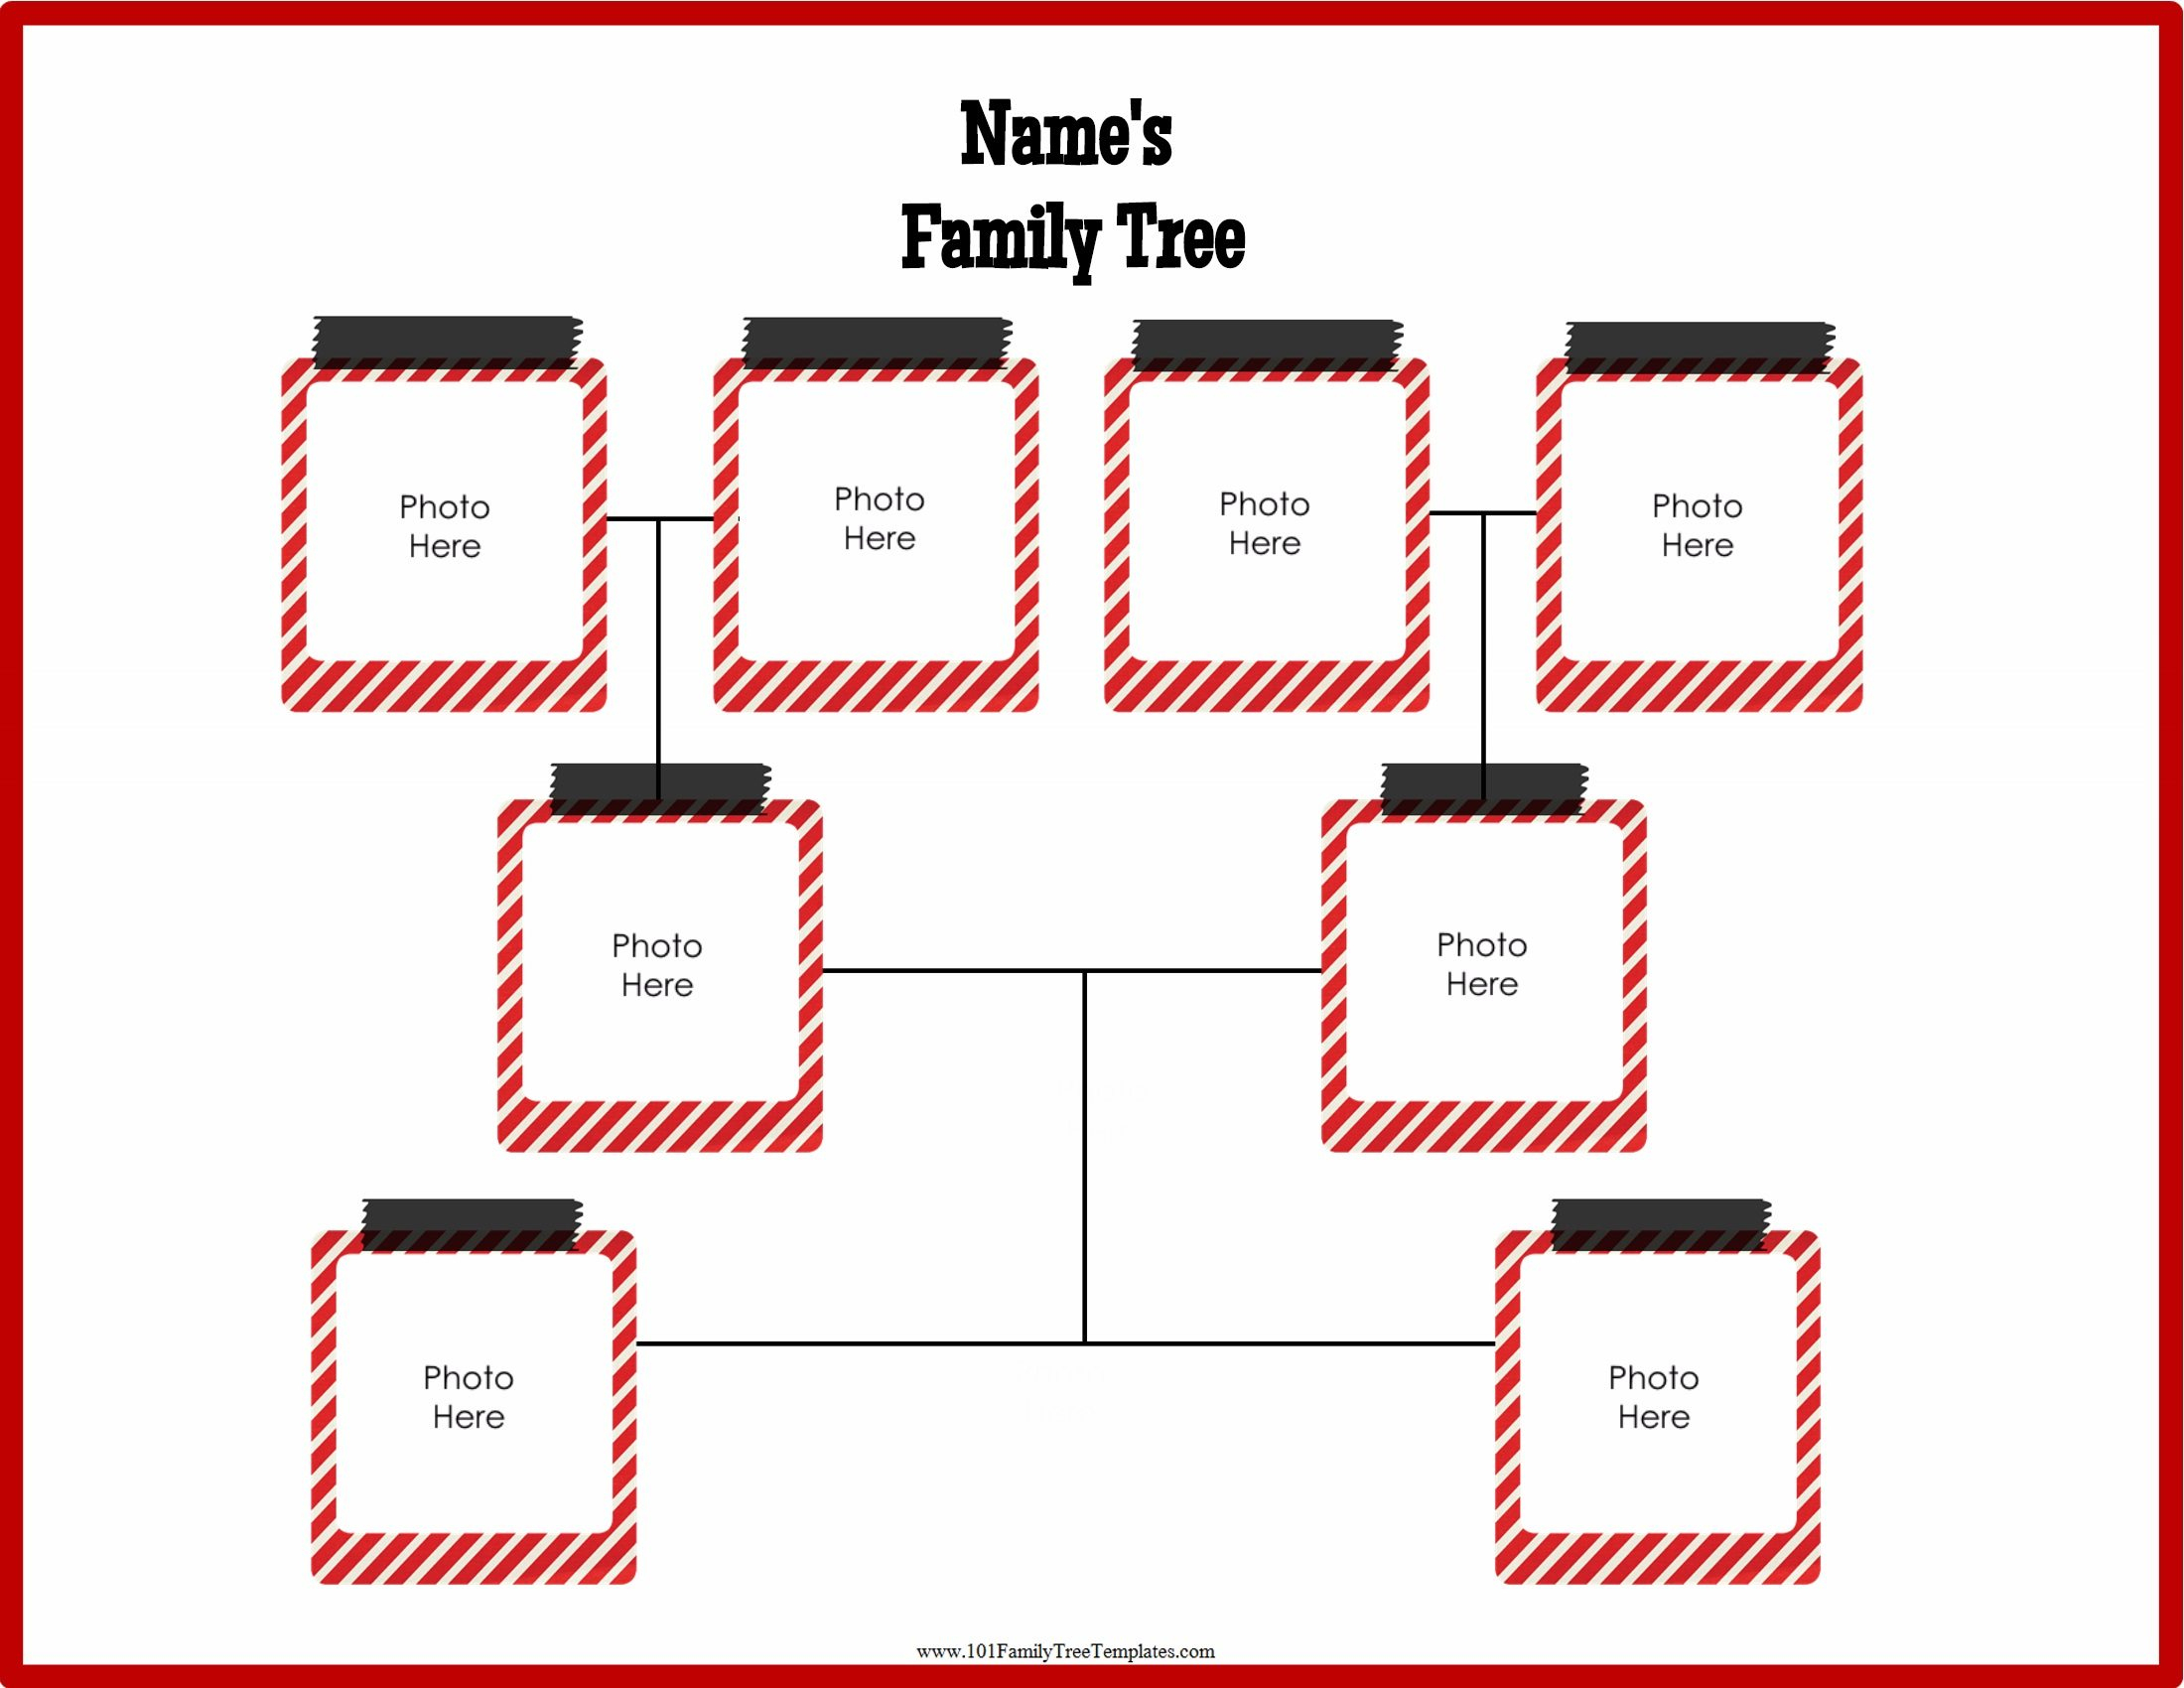 Free Family Tree Poster | Customize Online Then Print At Home - Family Tree Maker Online Free Printable